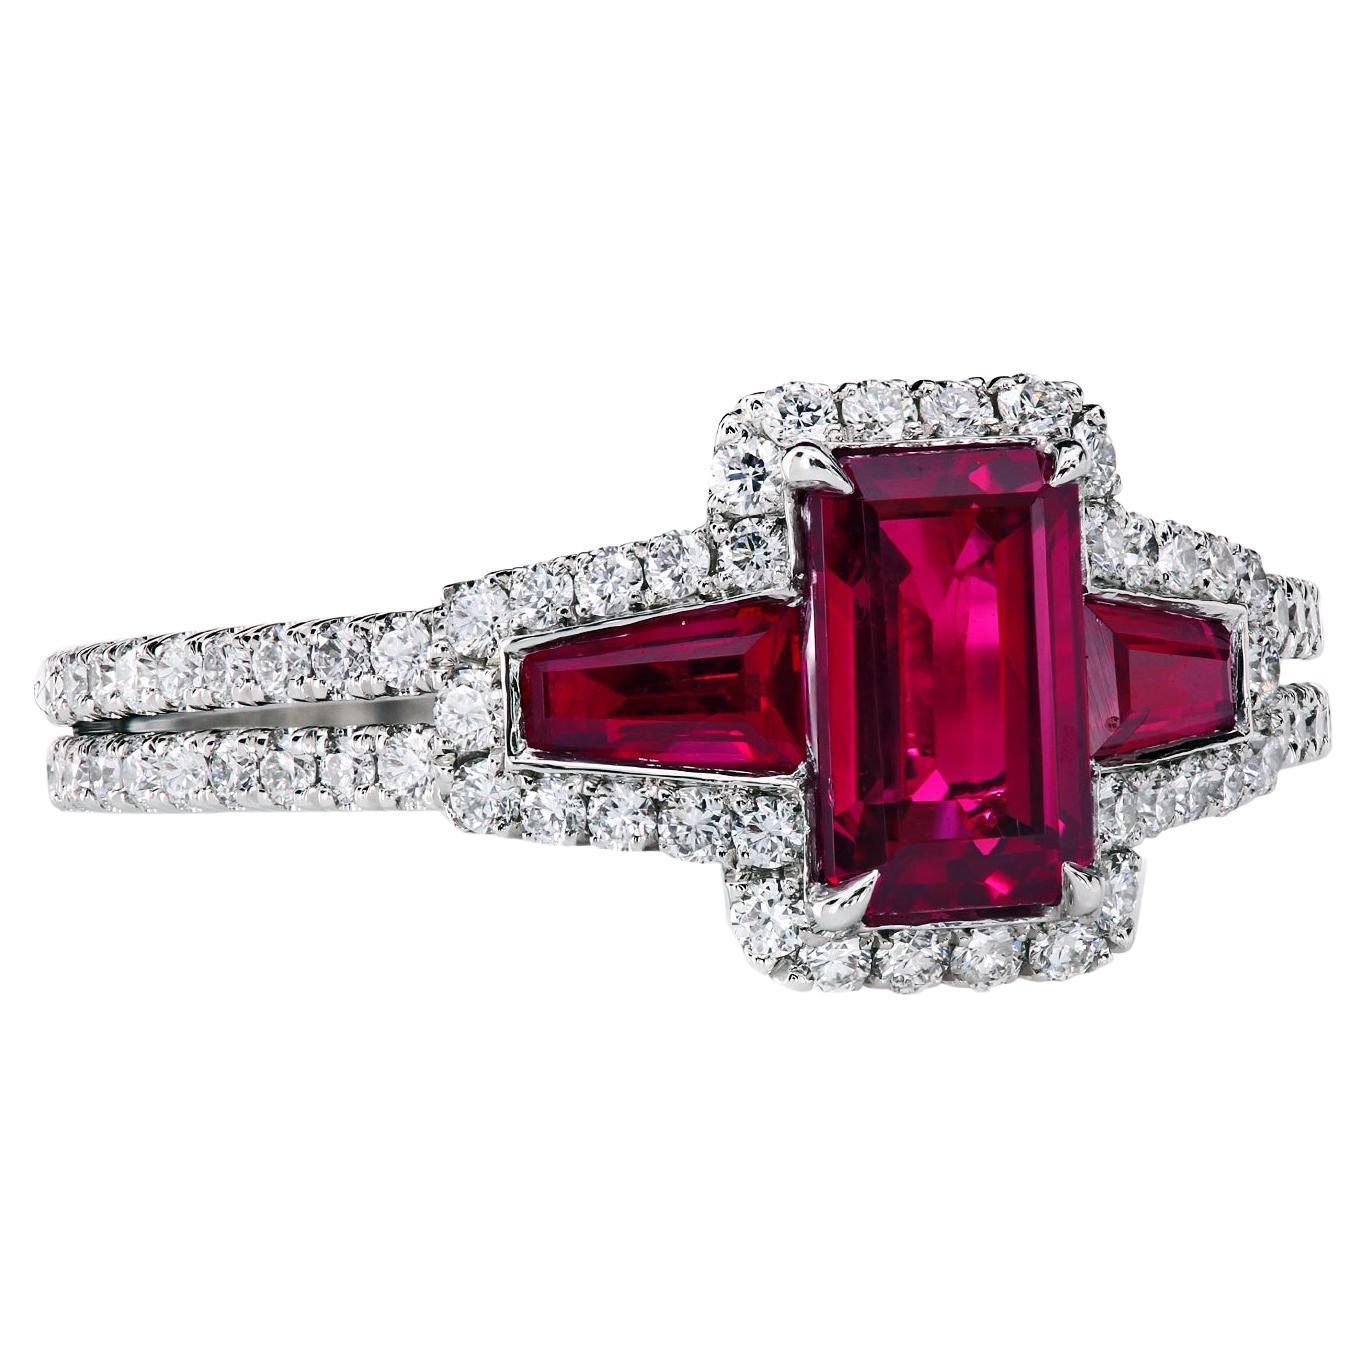 Three-stone ring with a 1.06-carat natural gem Thai ruby, certified by AGL CS1074721 and two natural rubies, tapered-baguettes 0.43-carat total.
The rubies are wrapped in 90 full cut F/VS ideal-cut diamonds, 0.58-carat total.
The hand-forged